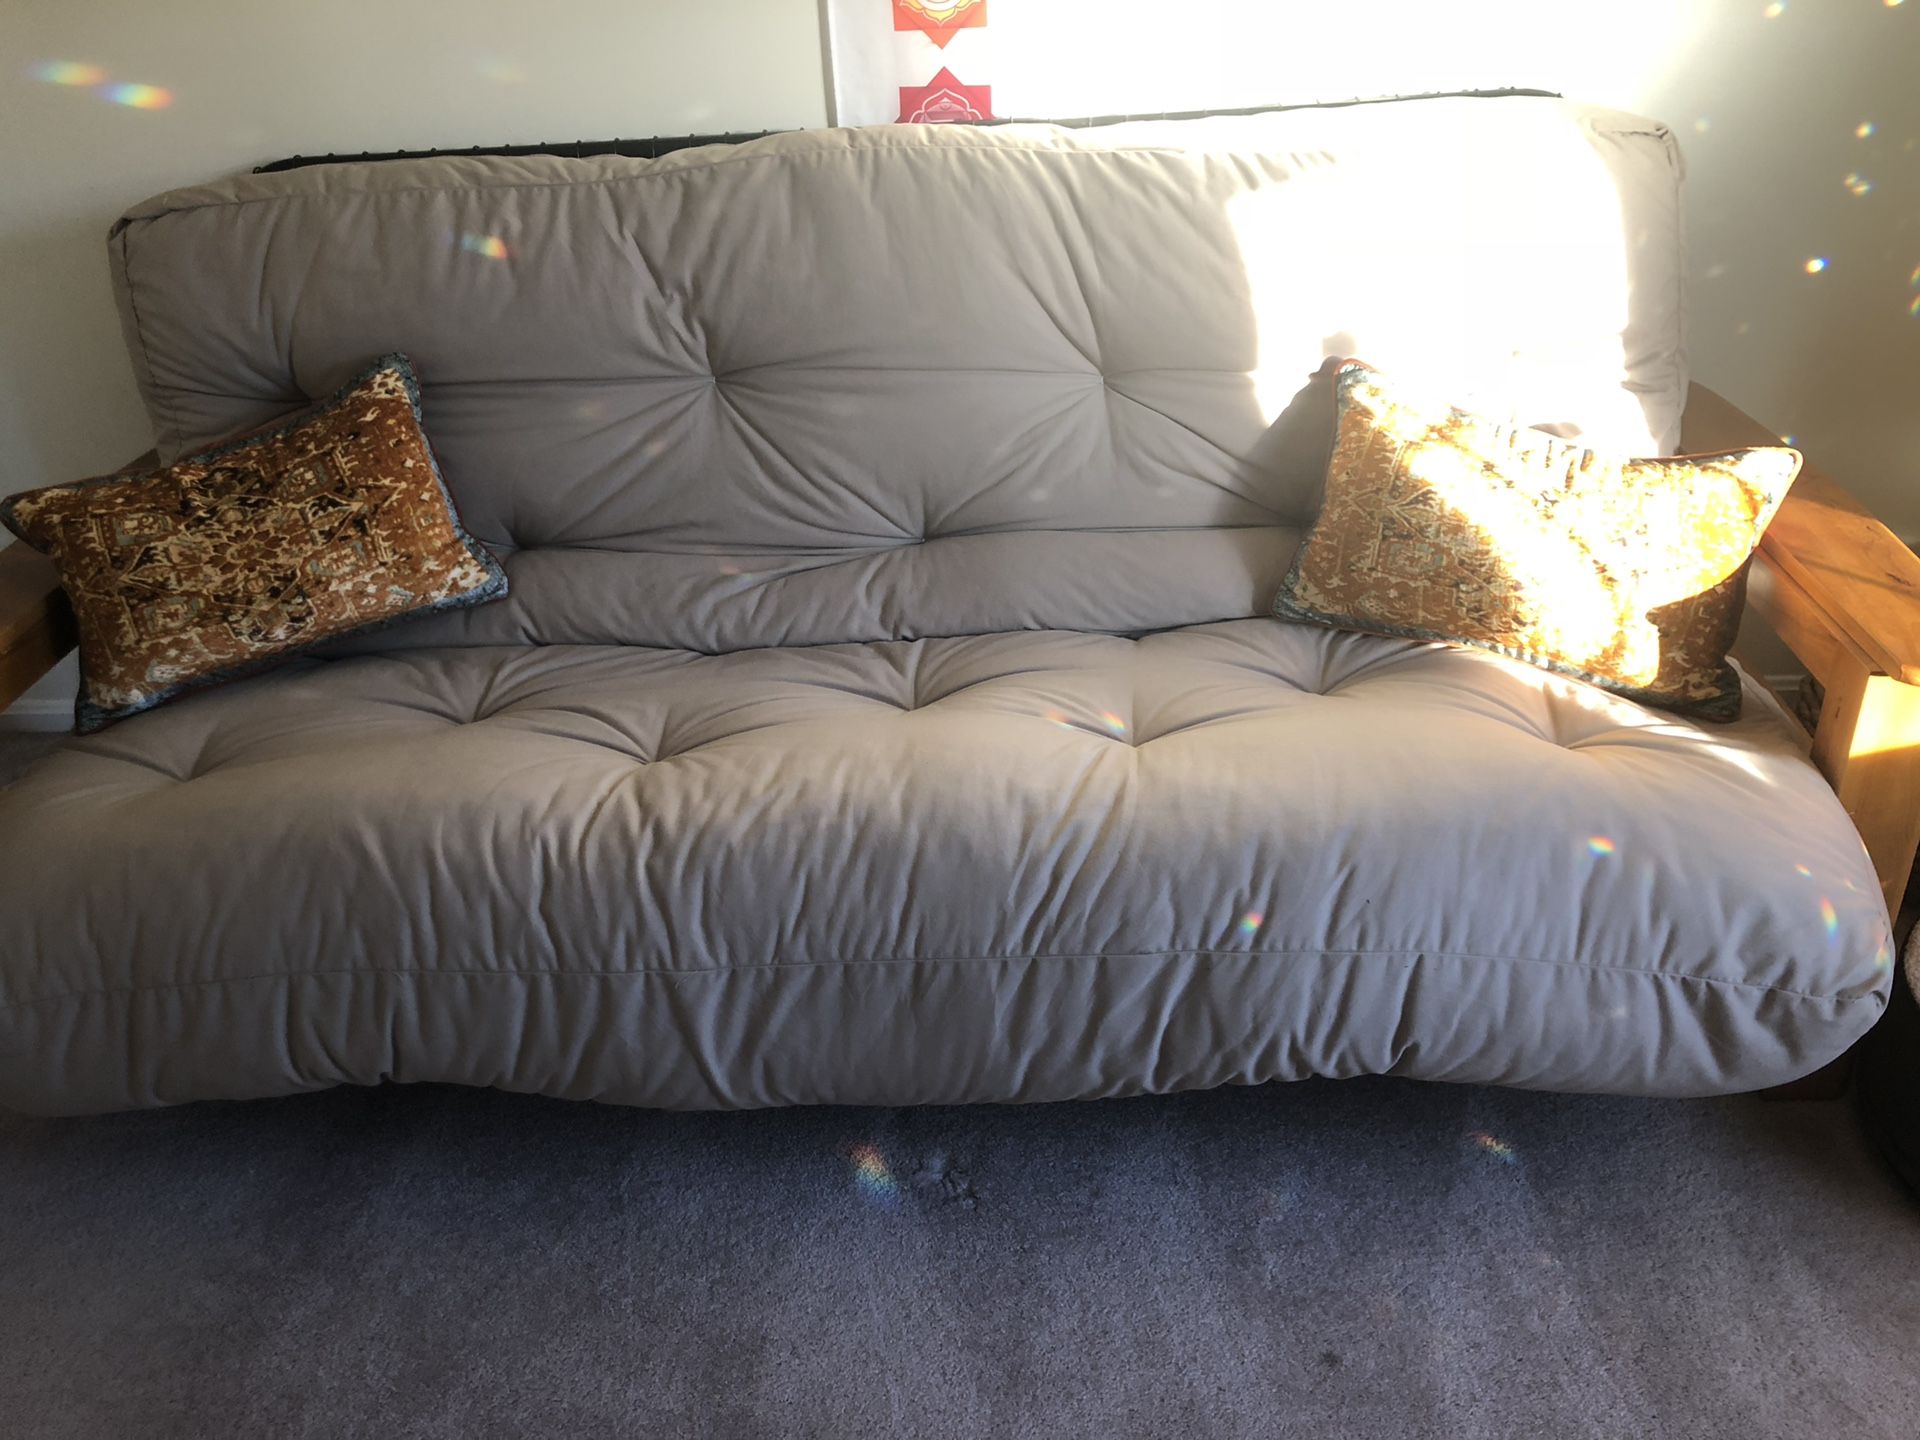 Queen sized futon with frame